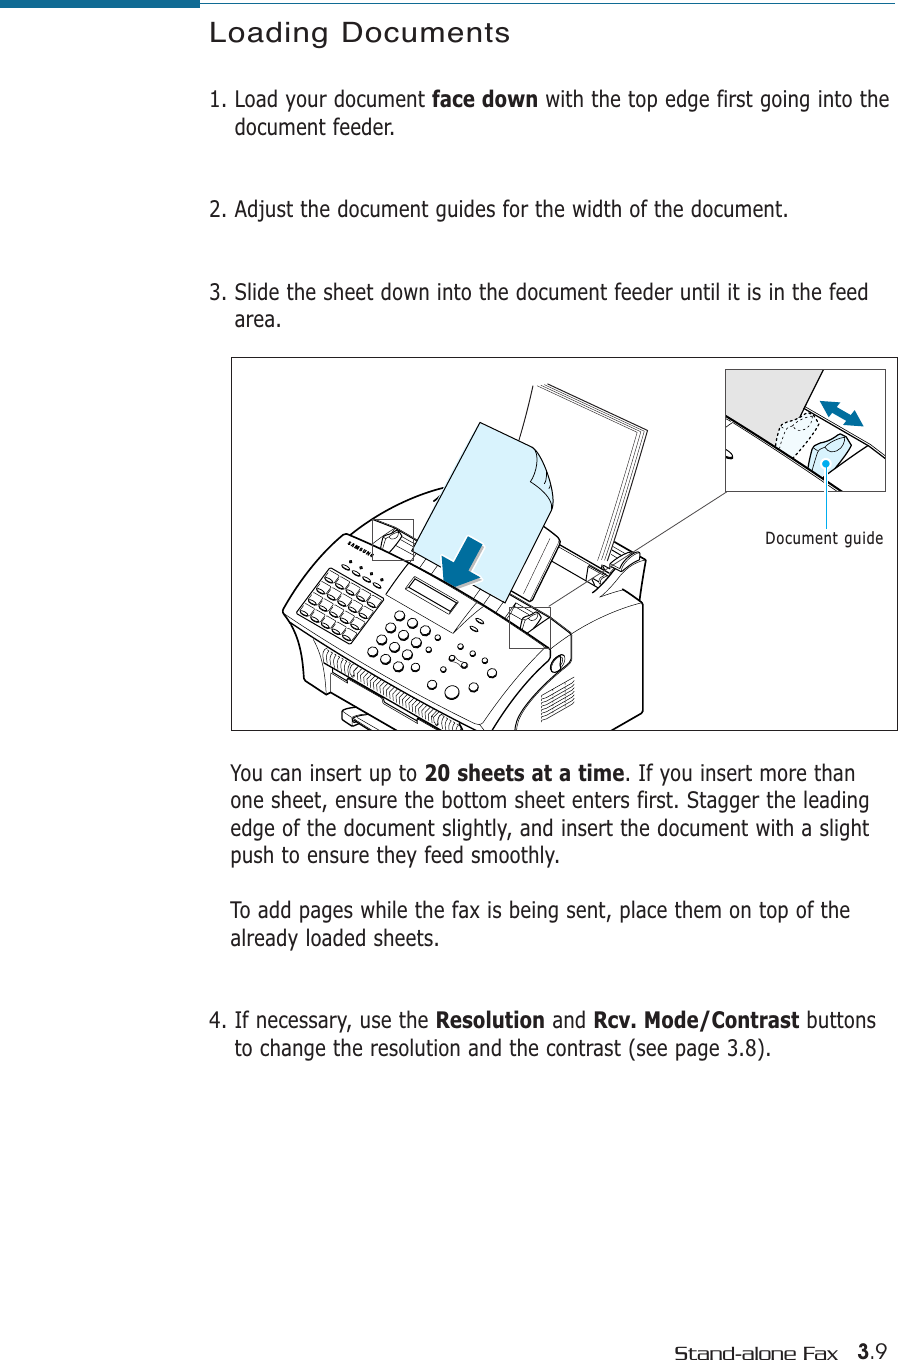 3.9Stand-alone FaxLoading Documents1. Load your document face down with the top edge first going into thedocument feeder. 2. Adjust the document guides for the width of the document. 3. Slide the sheet down into the document feeder until it is in the feedarea. You can insert up to 20 sheets at a time. If you insert more thanone sheet, ensure the bottom sheet enters first. Stagger the leadingedge of the document slightly, and insert the document with a slightpush to ensure they feed smoothly. To add pages while the fax is being sent, place them on top of thealready loaded sheets. 4. If necessary, use the Resolution and Rcv. Mode/Contrast buttonsto change the resolution and the contrast (see page 3.8).Document guide